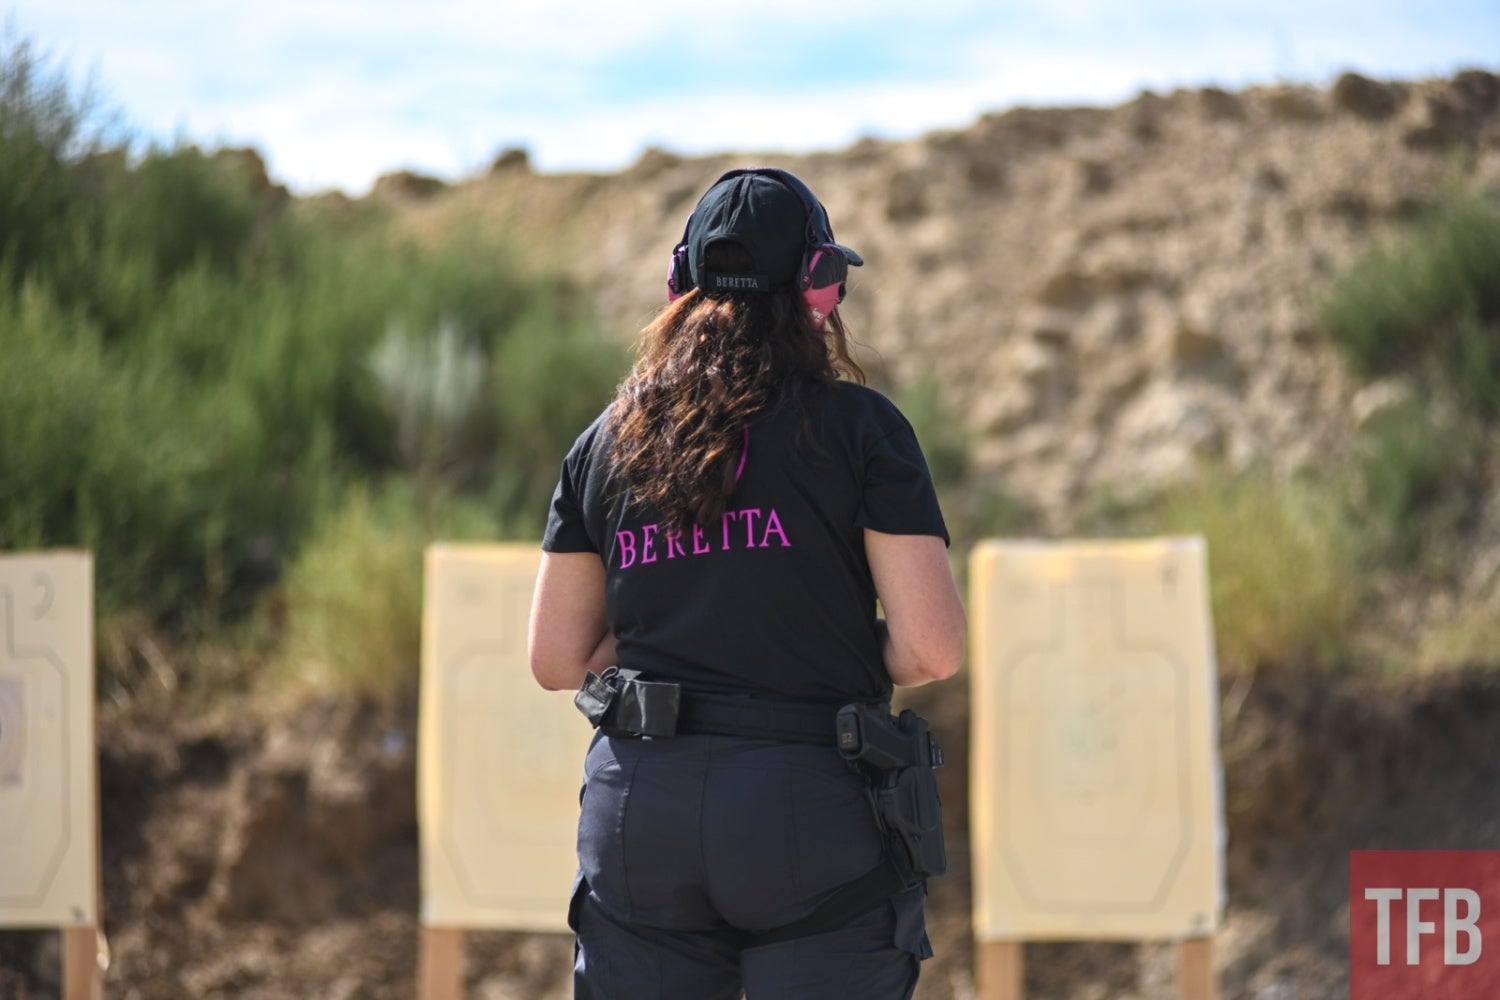 TFB Review: A Female View On The Beretta Ladies Gear Collection